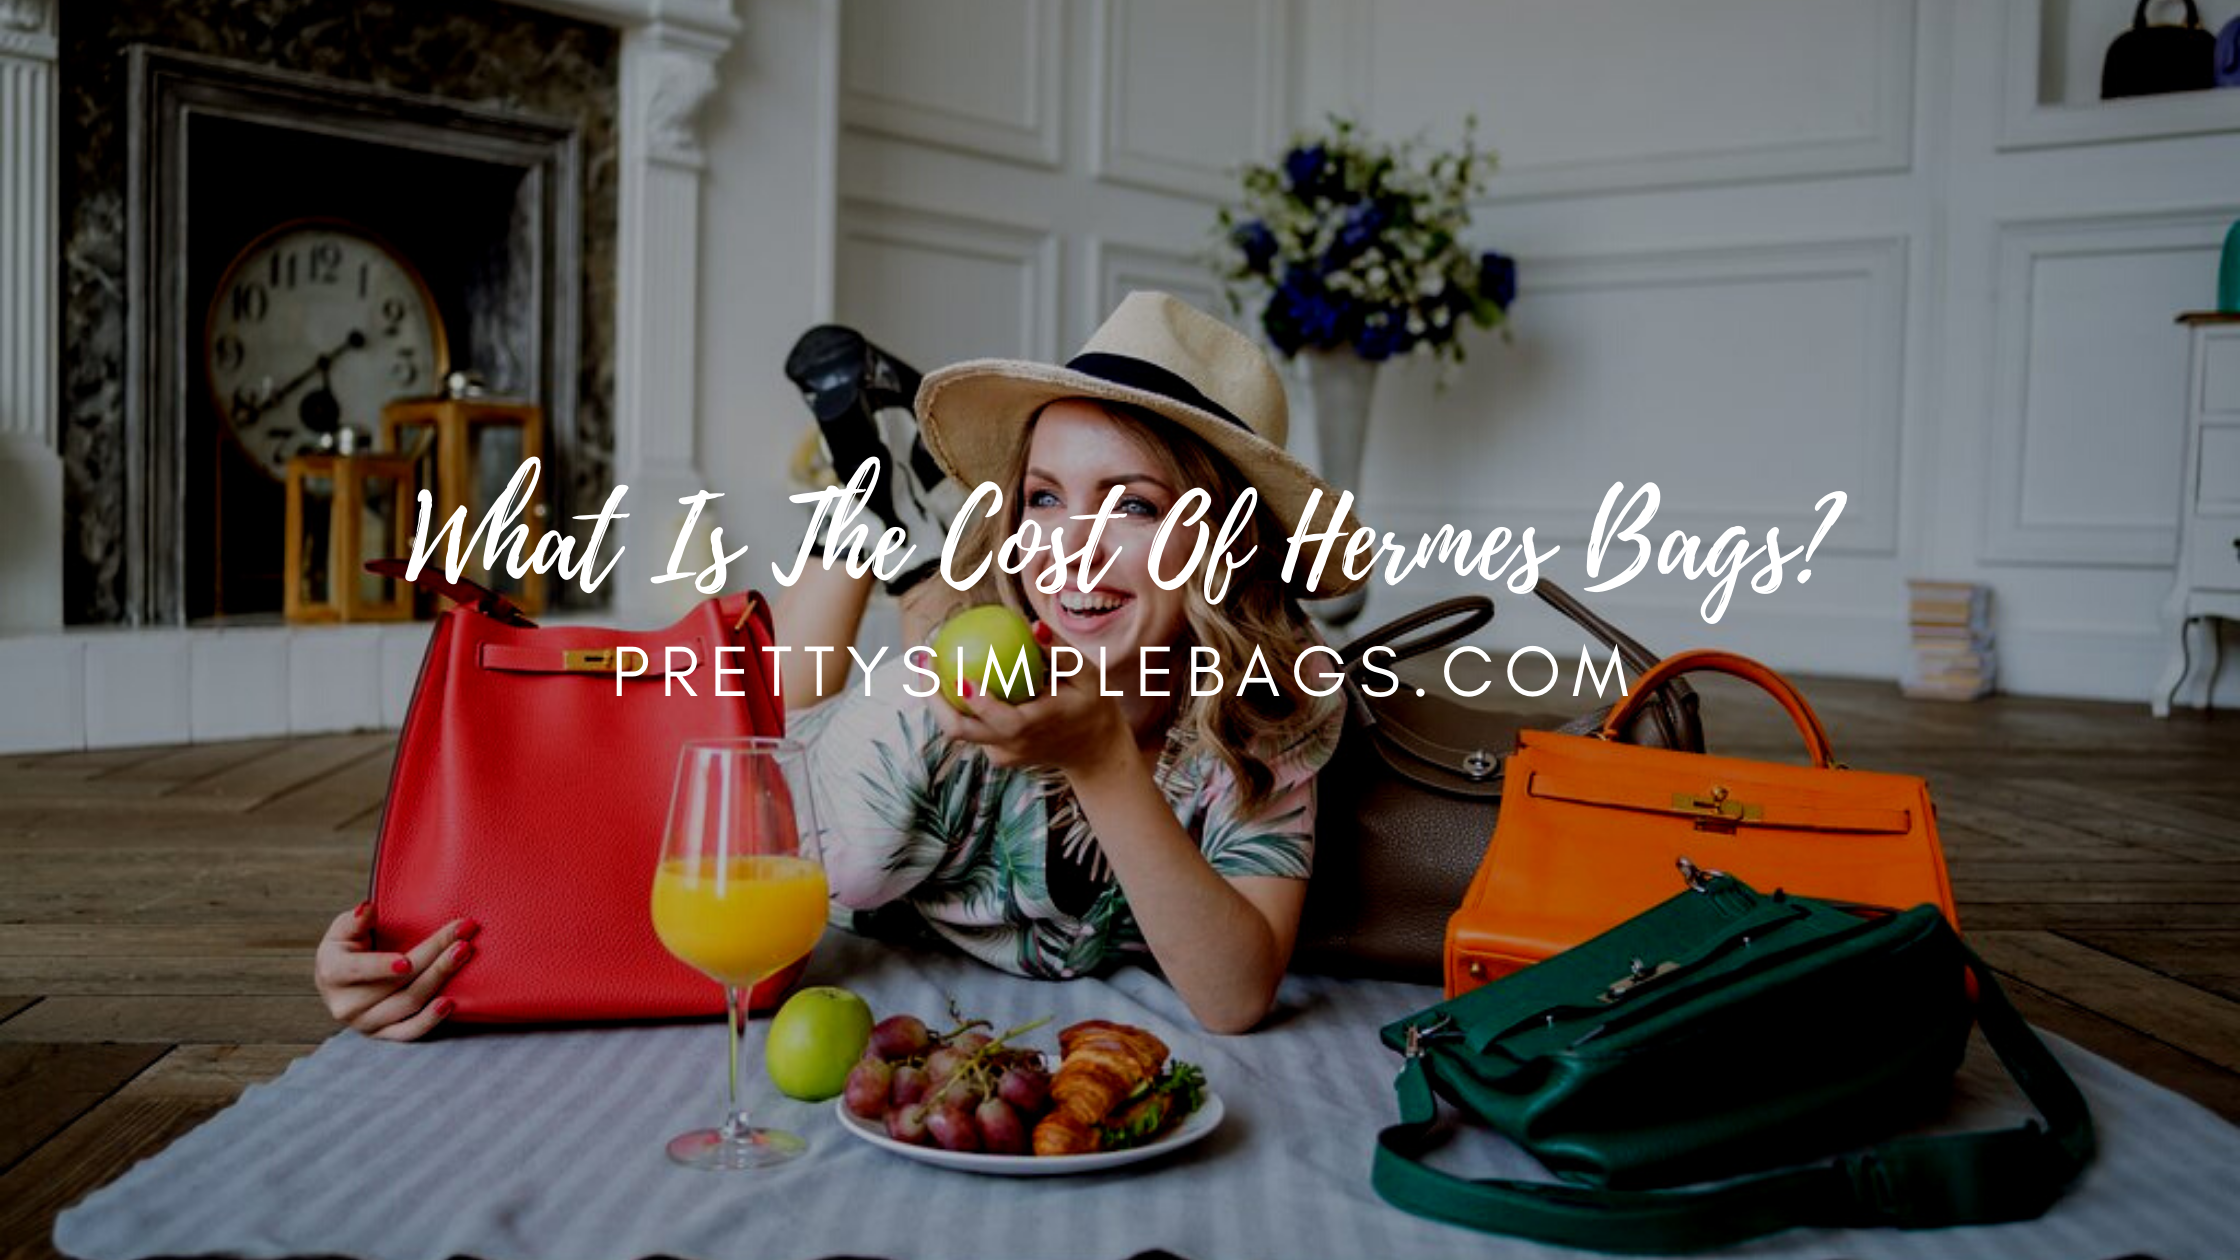 what is the cost of hermes bags